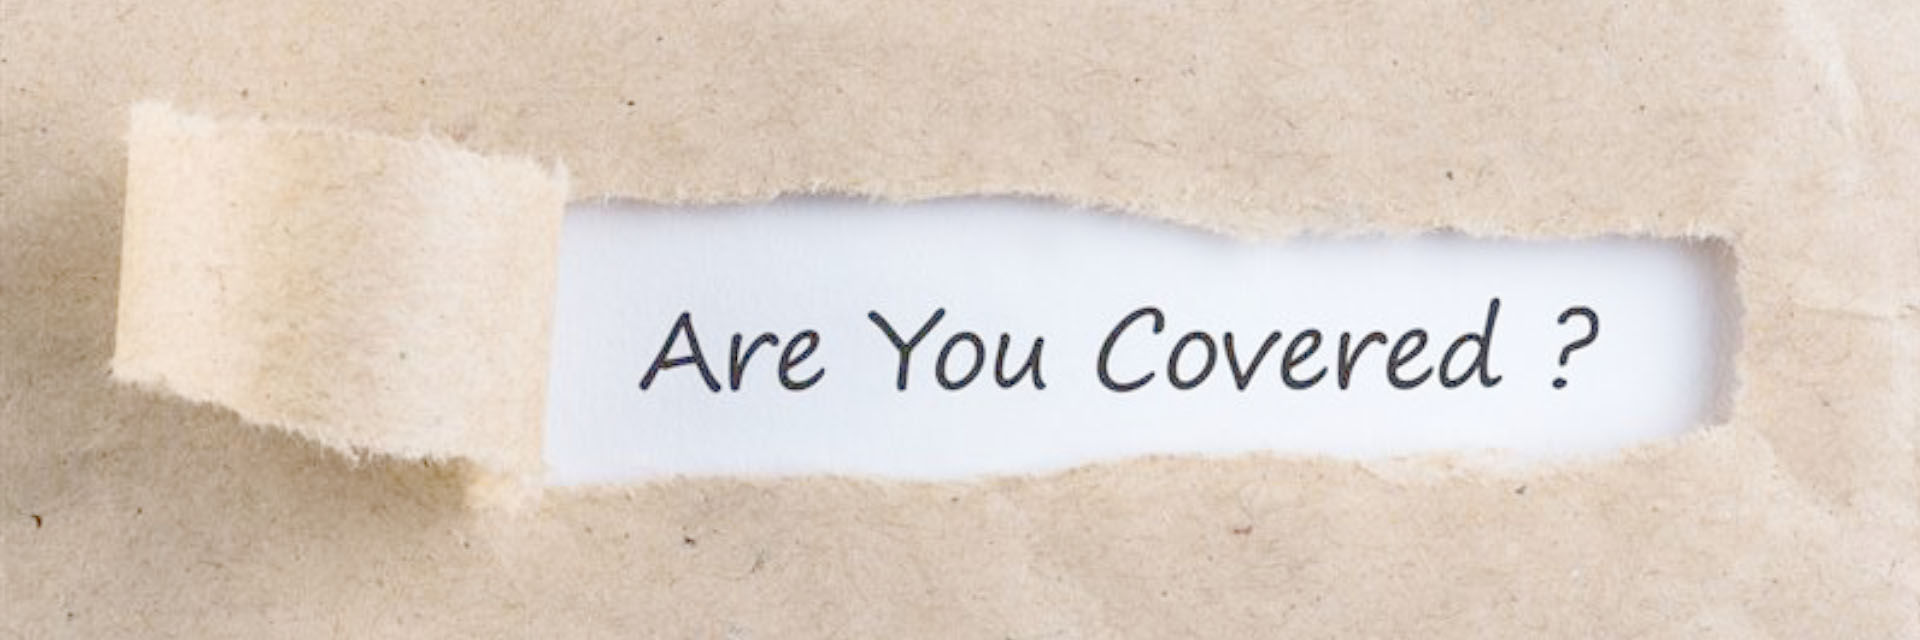 Photo of a brown envelope with the words "Are You Covered?" written on it 